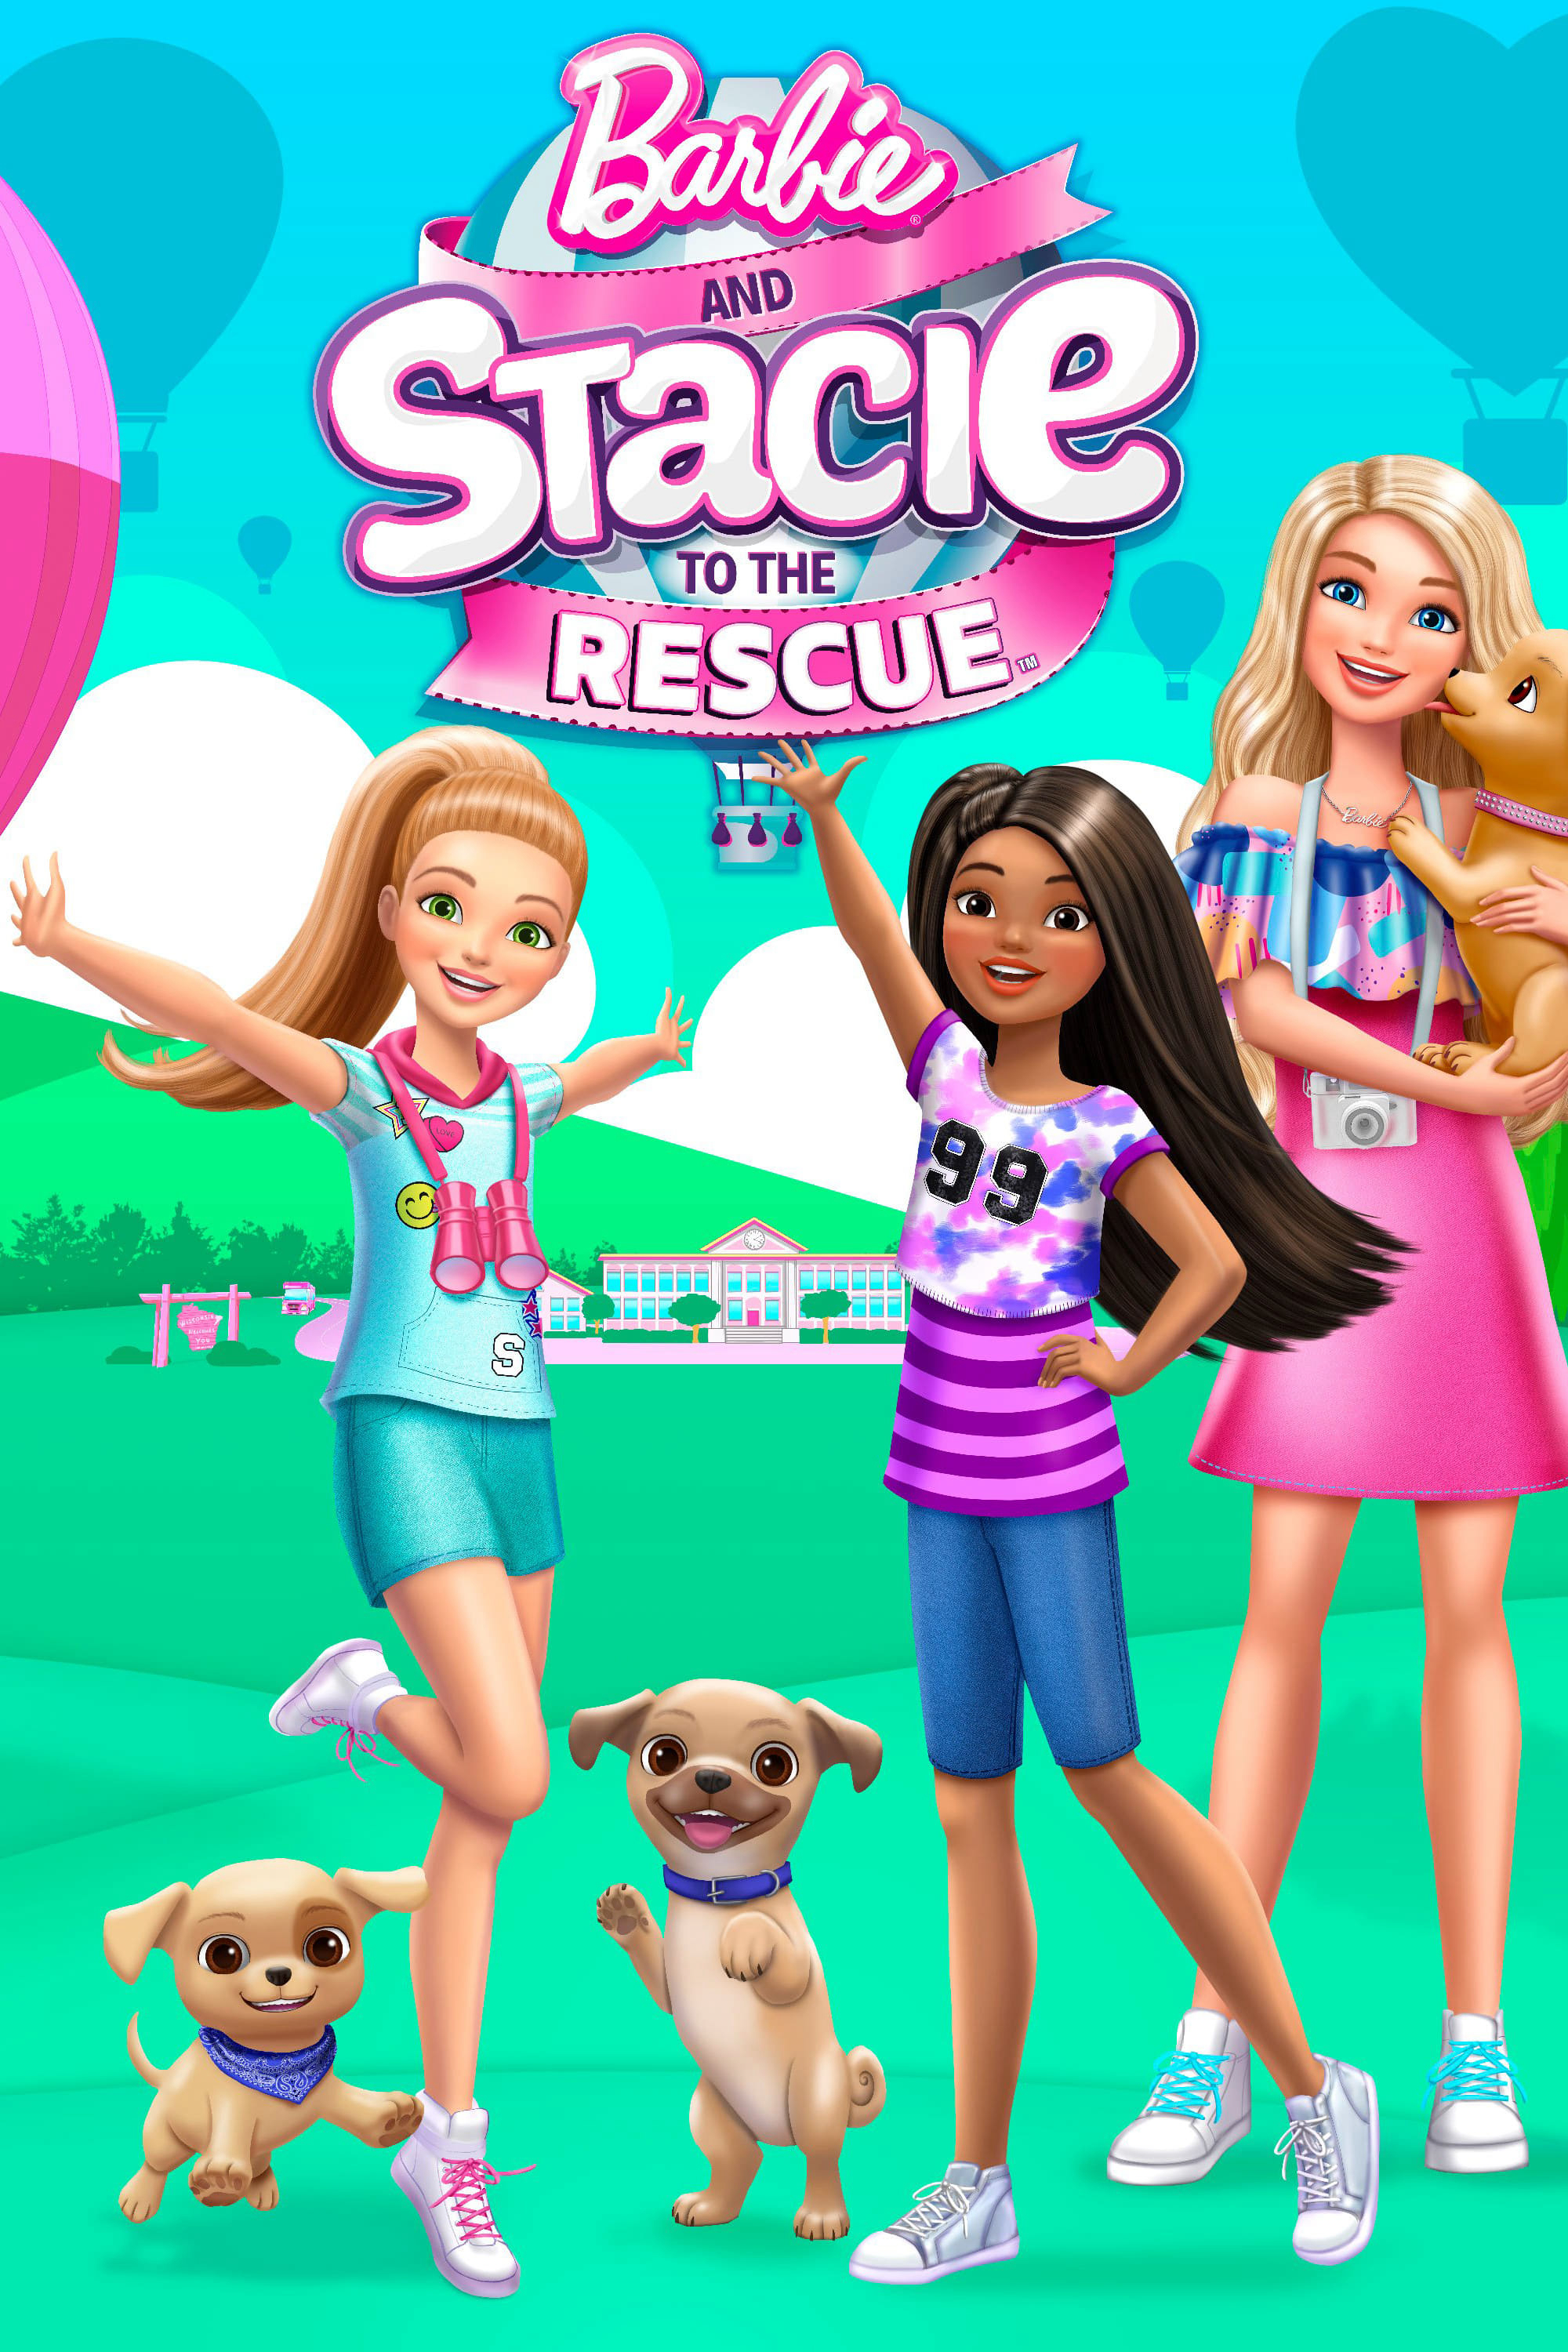 Poster Phim Barbie and Stacie to the Rescue (Barbie and Stacie to the Rescue)